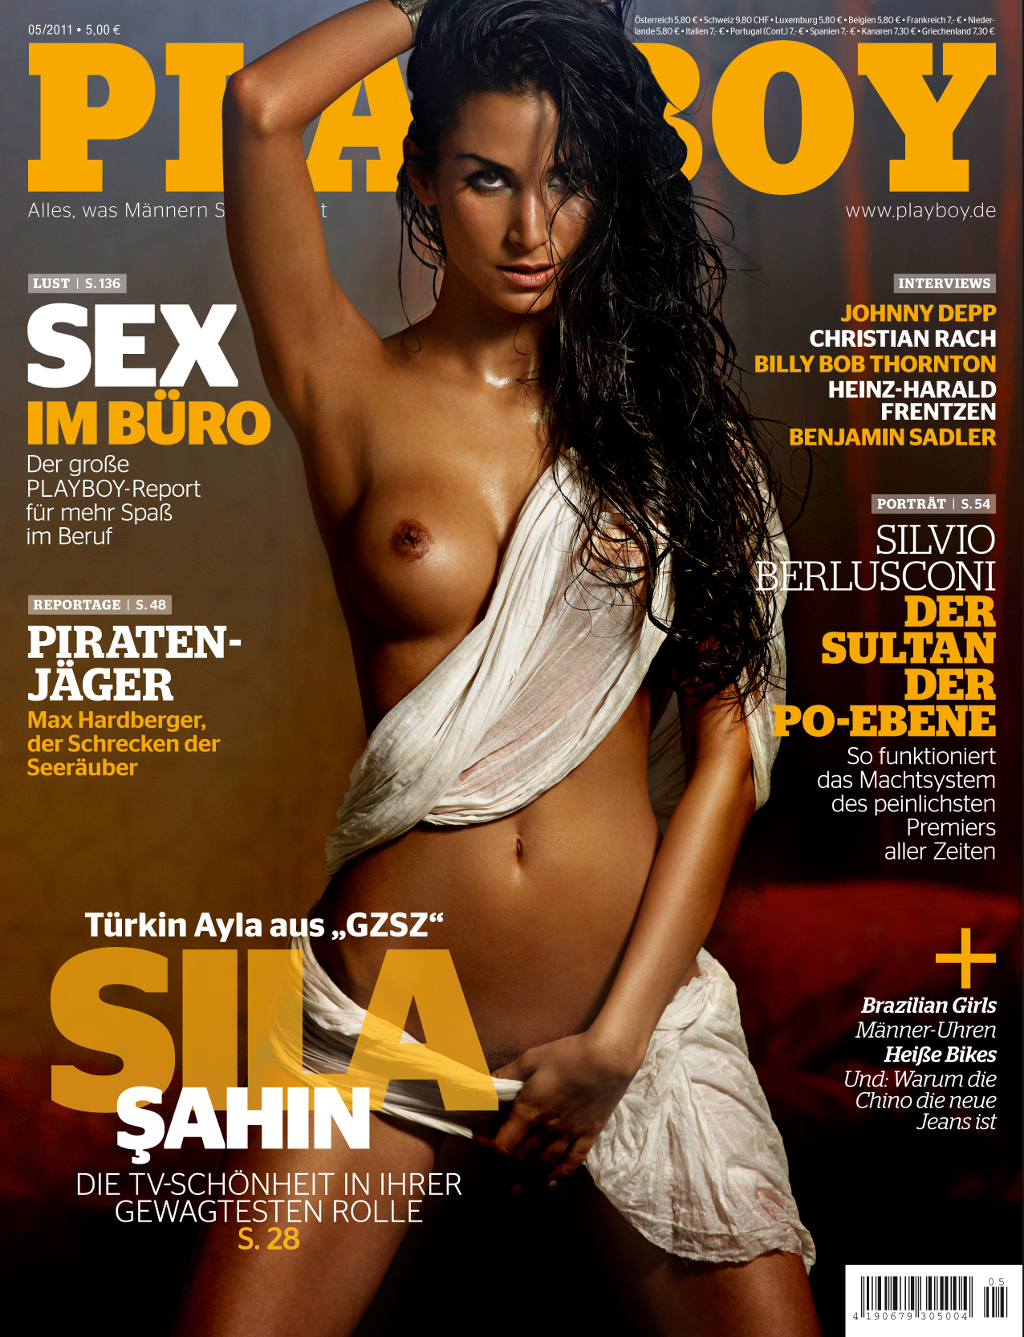 Sila Sahin becomes first Turkish and Muslim woman to strip for Playboy, May 2011 issue of the German version.